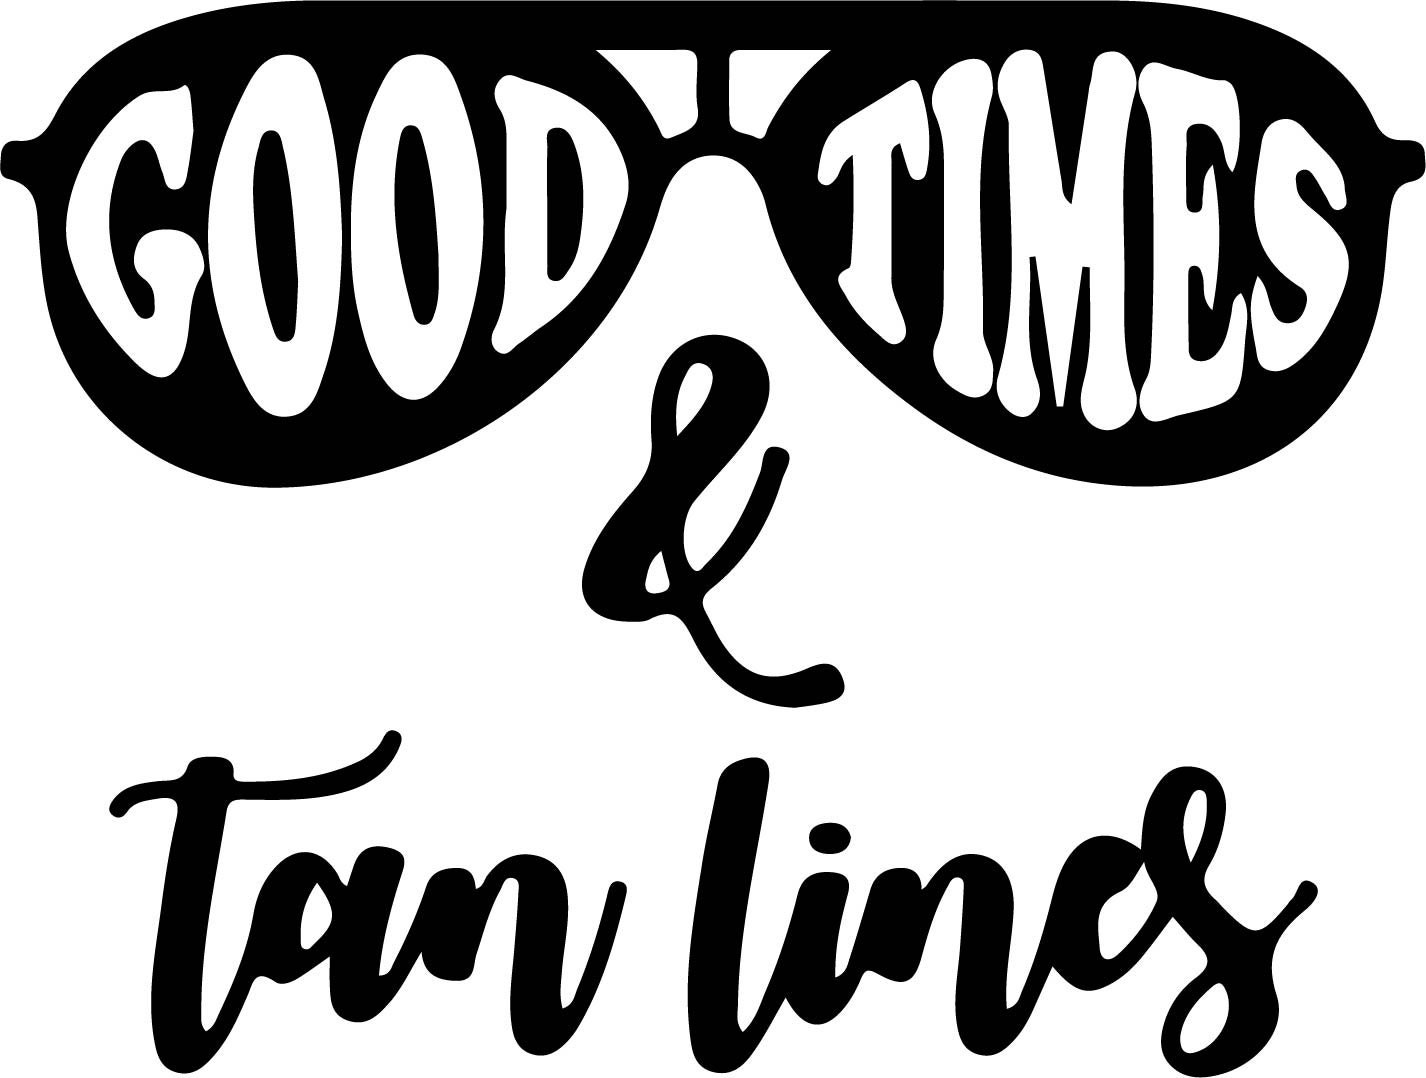 Good times and tan lines svgpngjpegepsdxfaipdf | Etsy